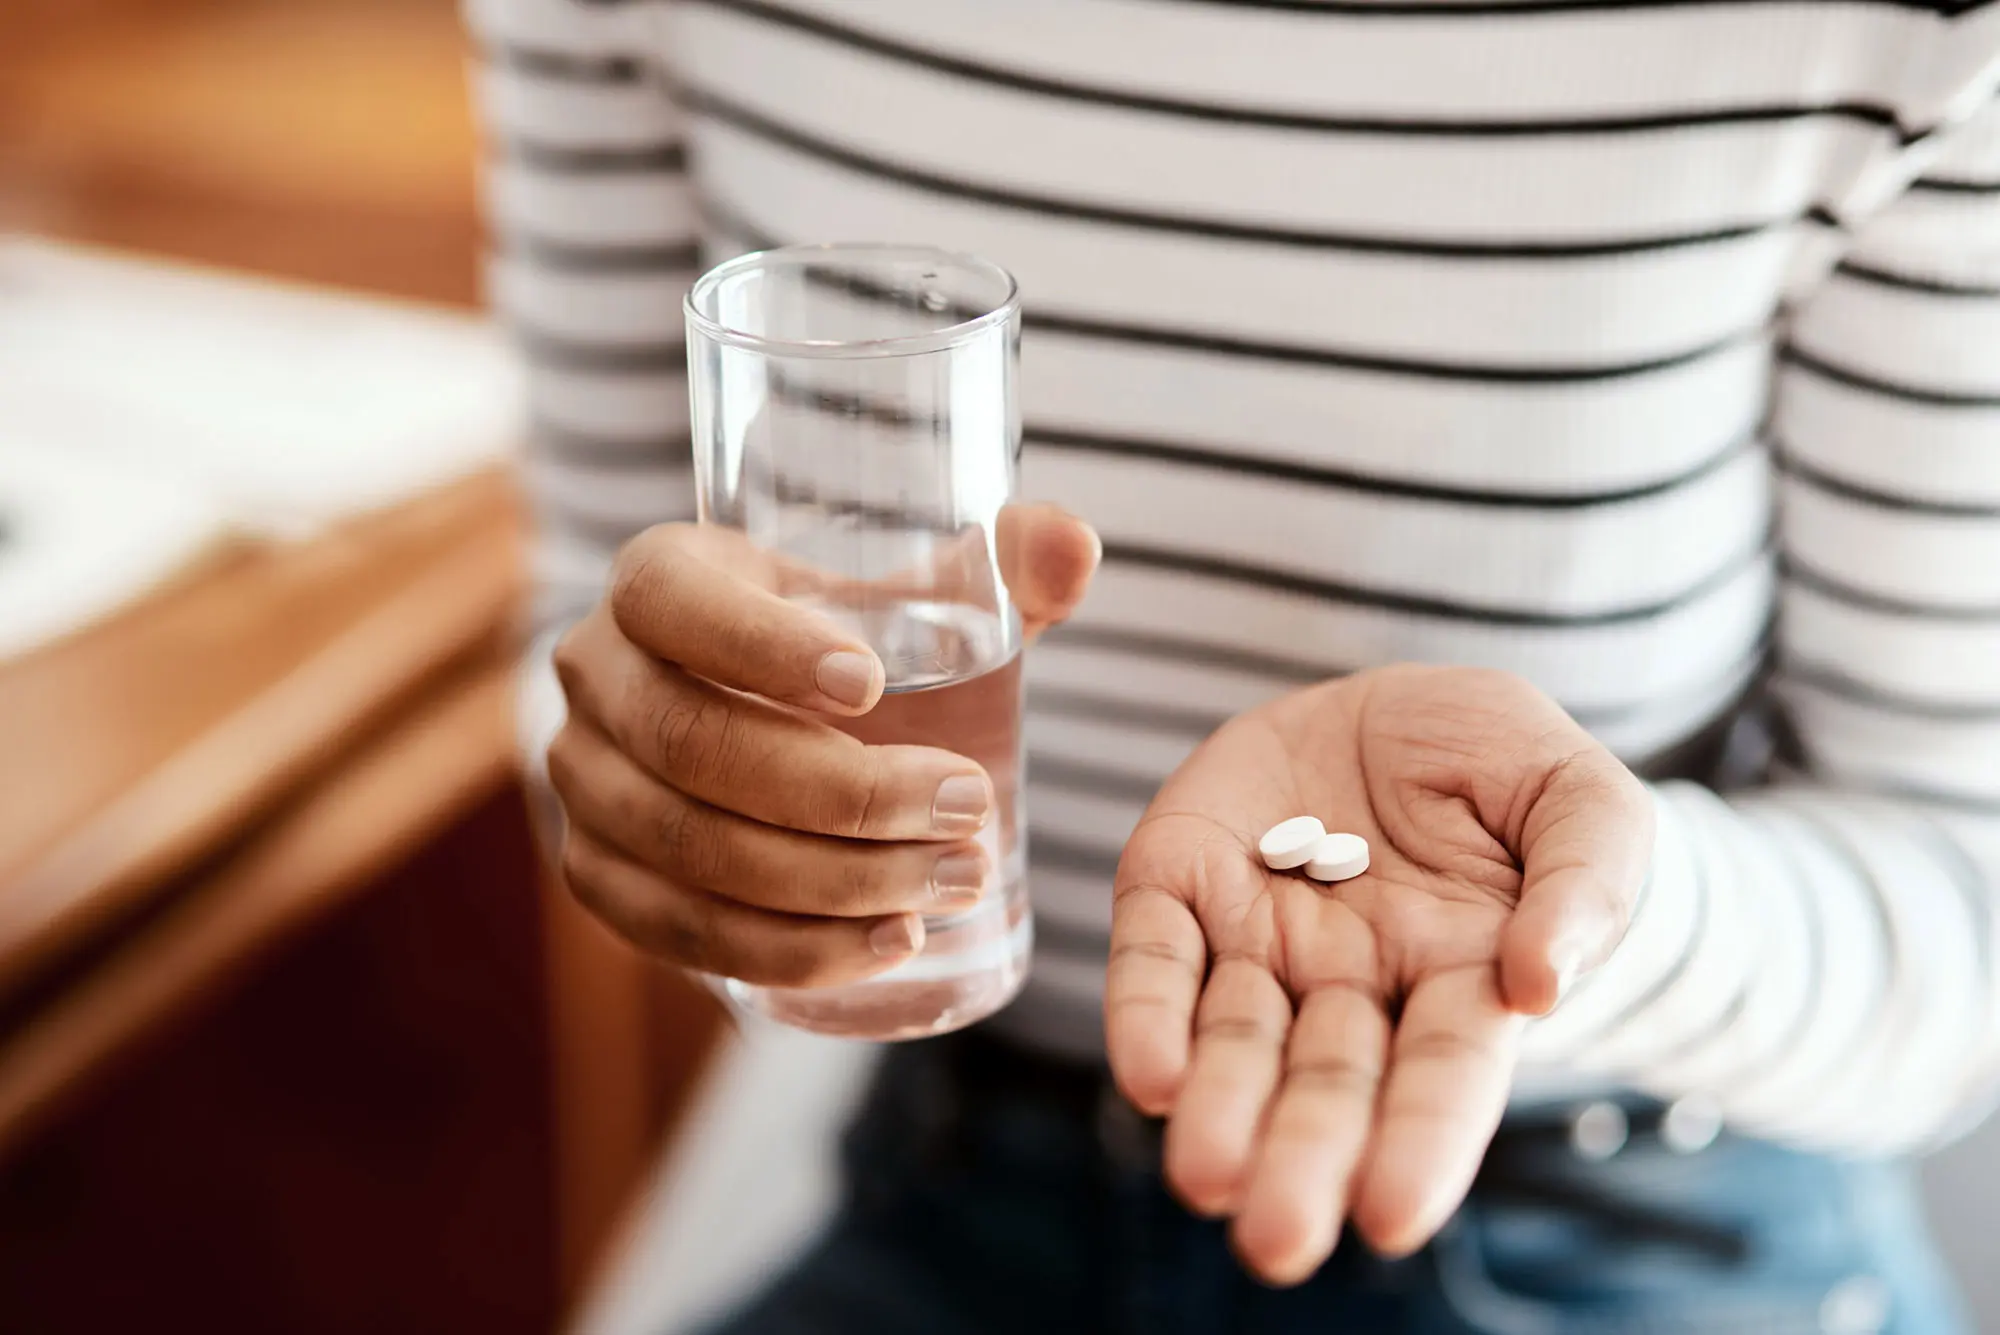 Woman in striped shirt with glass of water and pills in the palm of her hand. AW477 